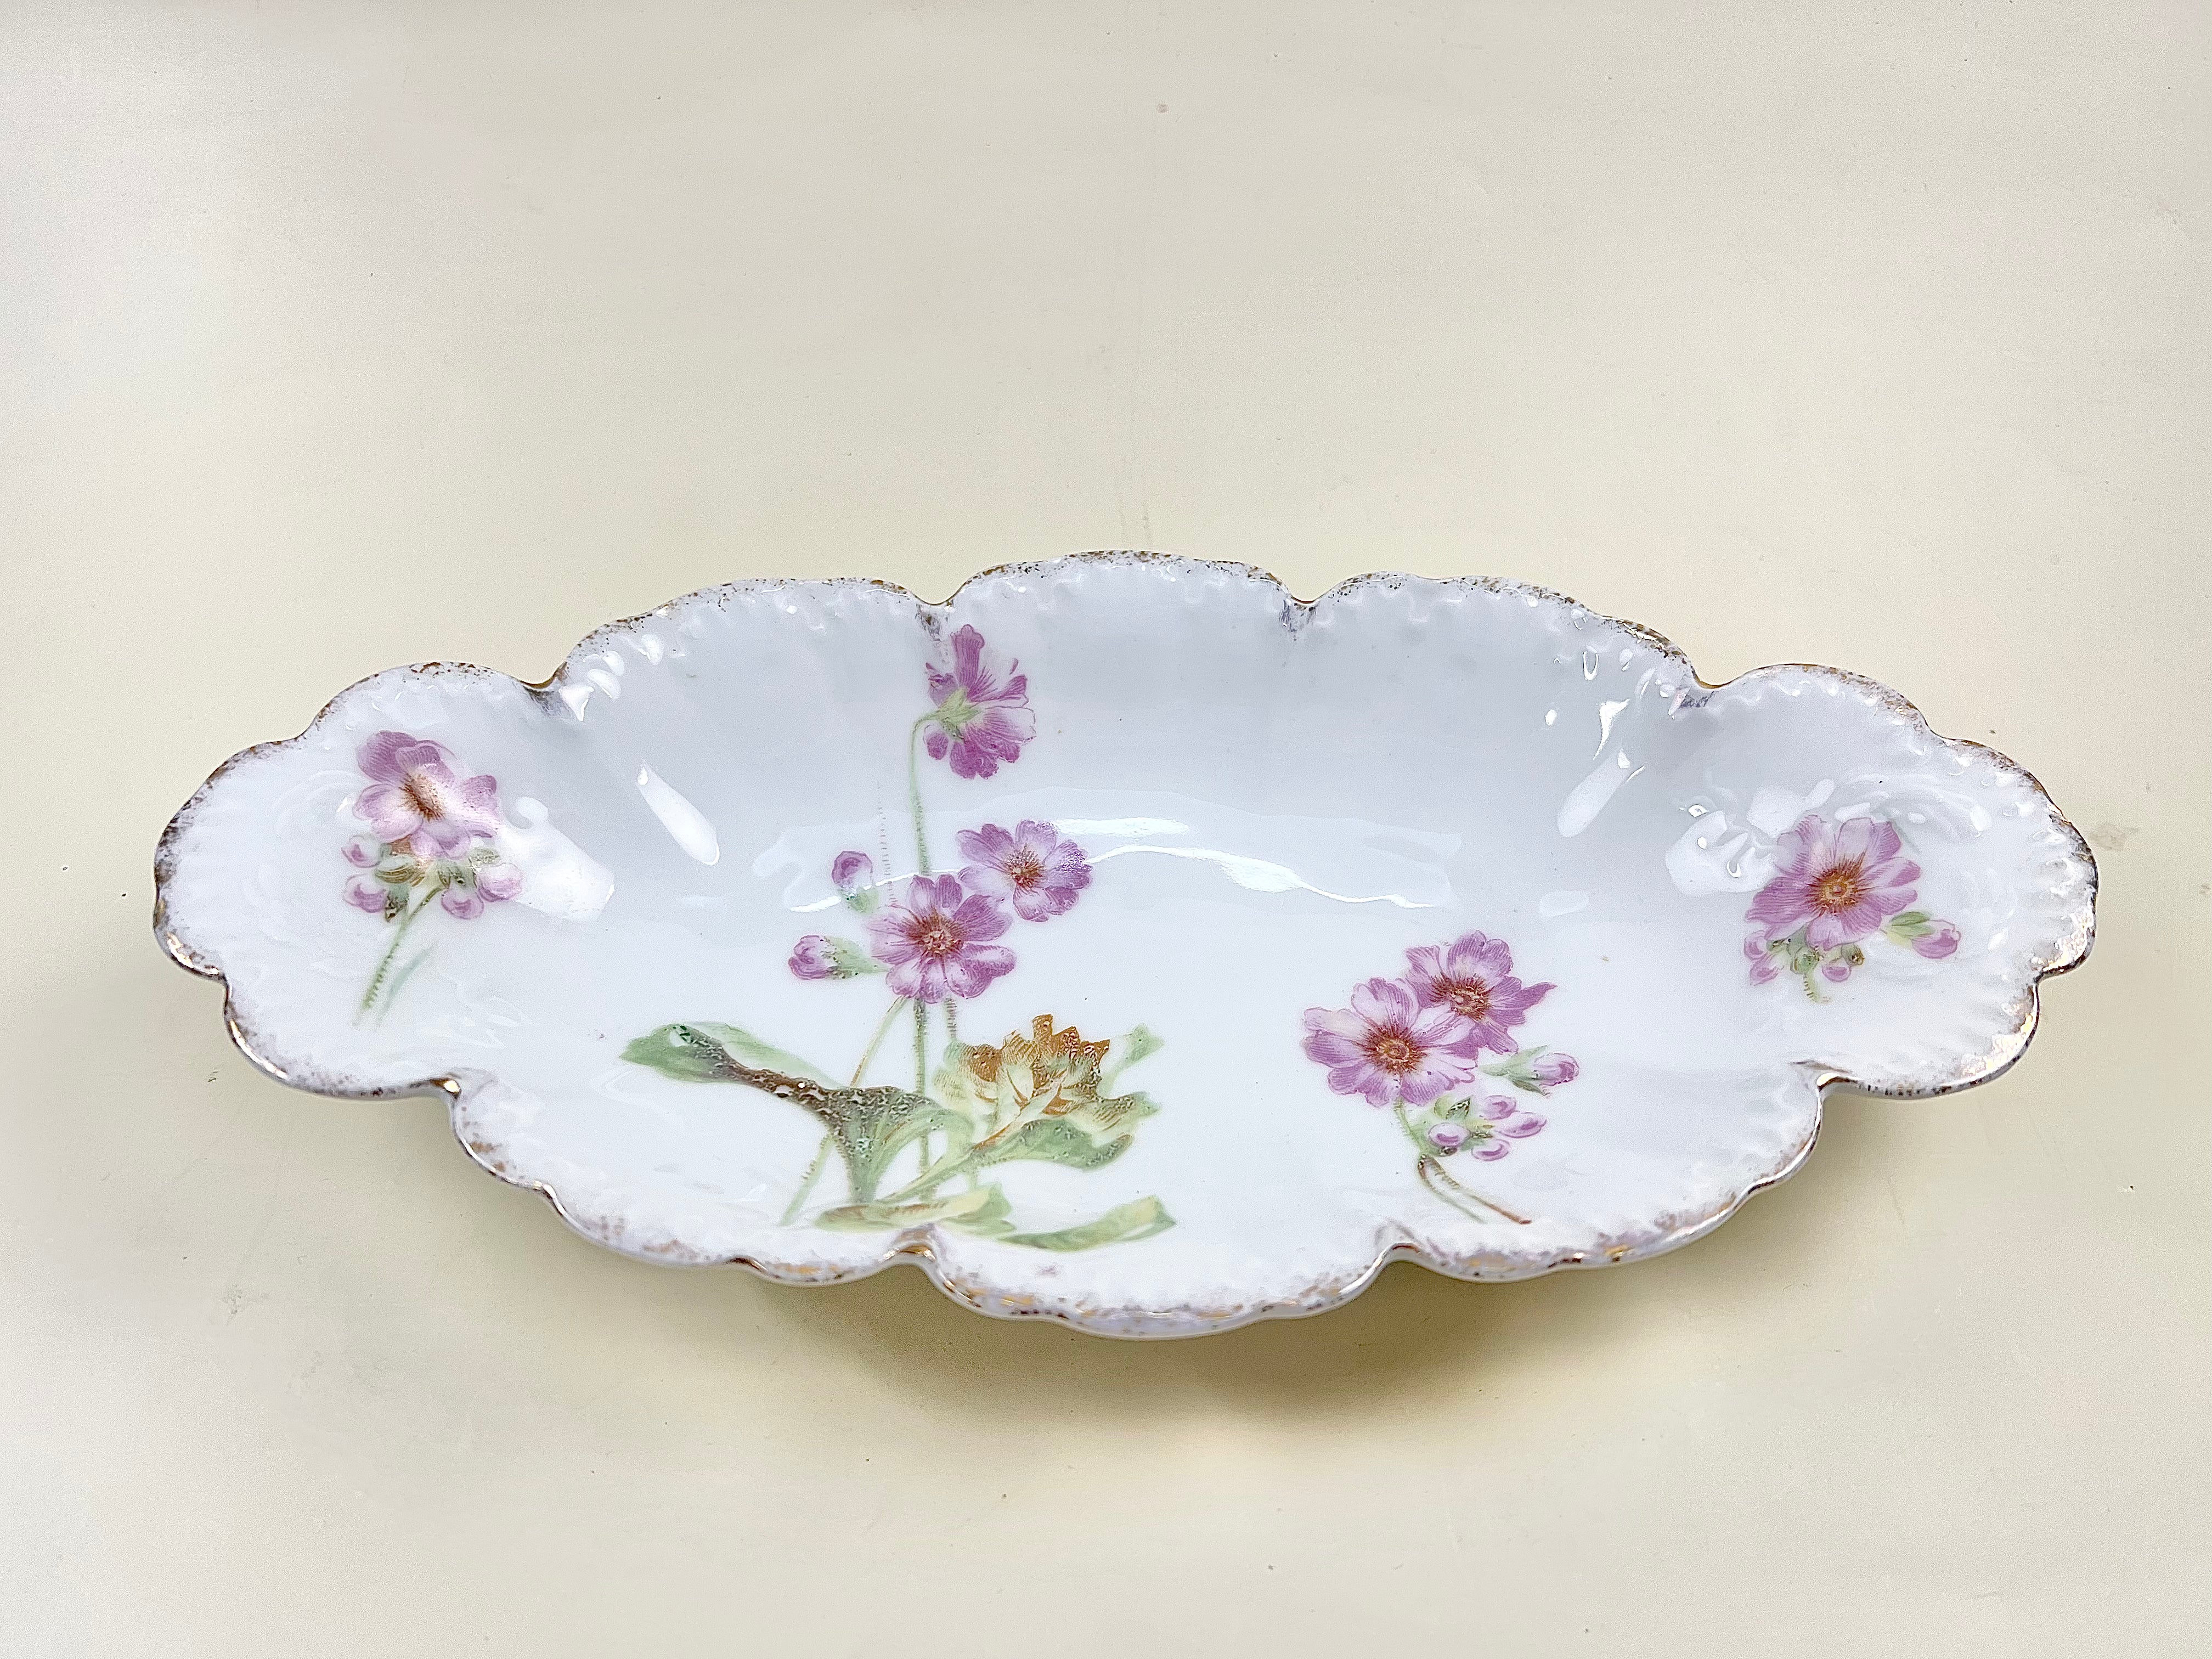 Oblong Porcelain Catchall Dish with Pink Flowers